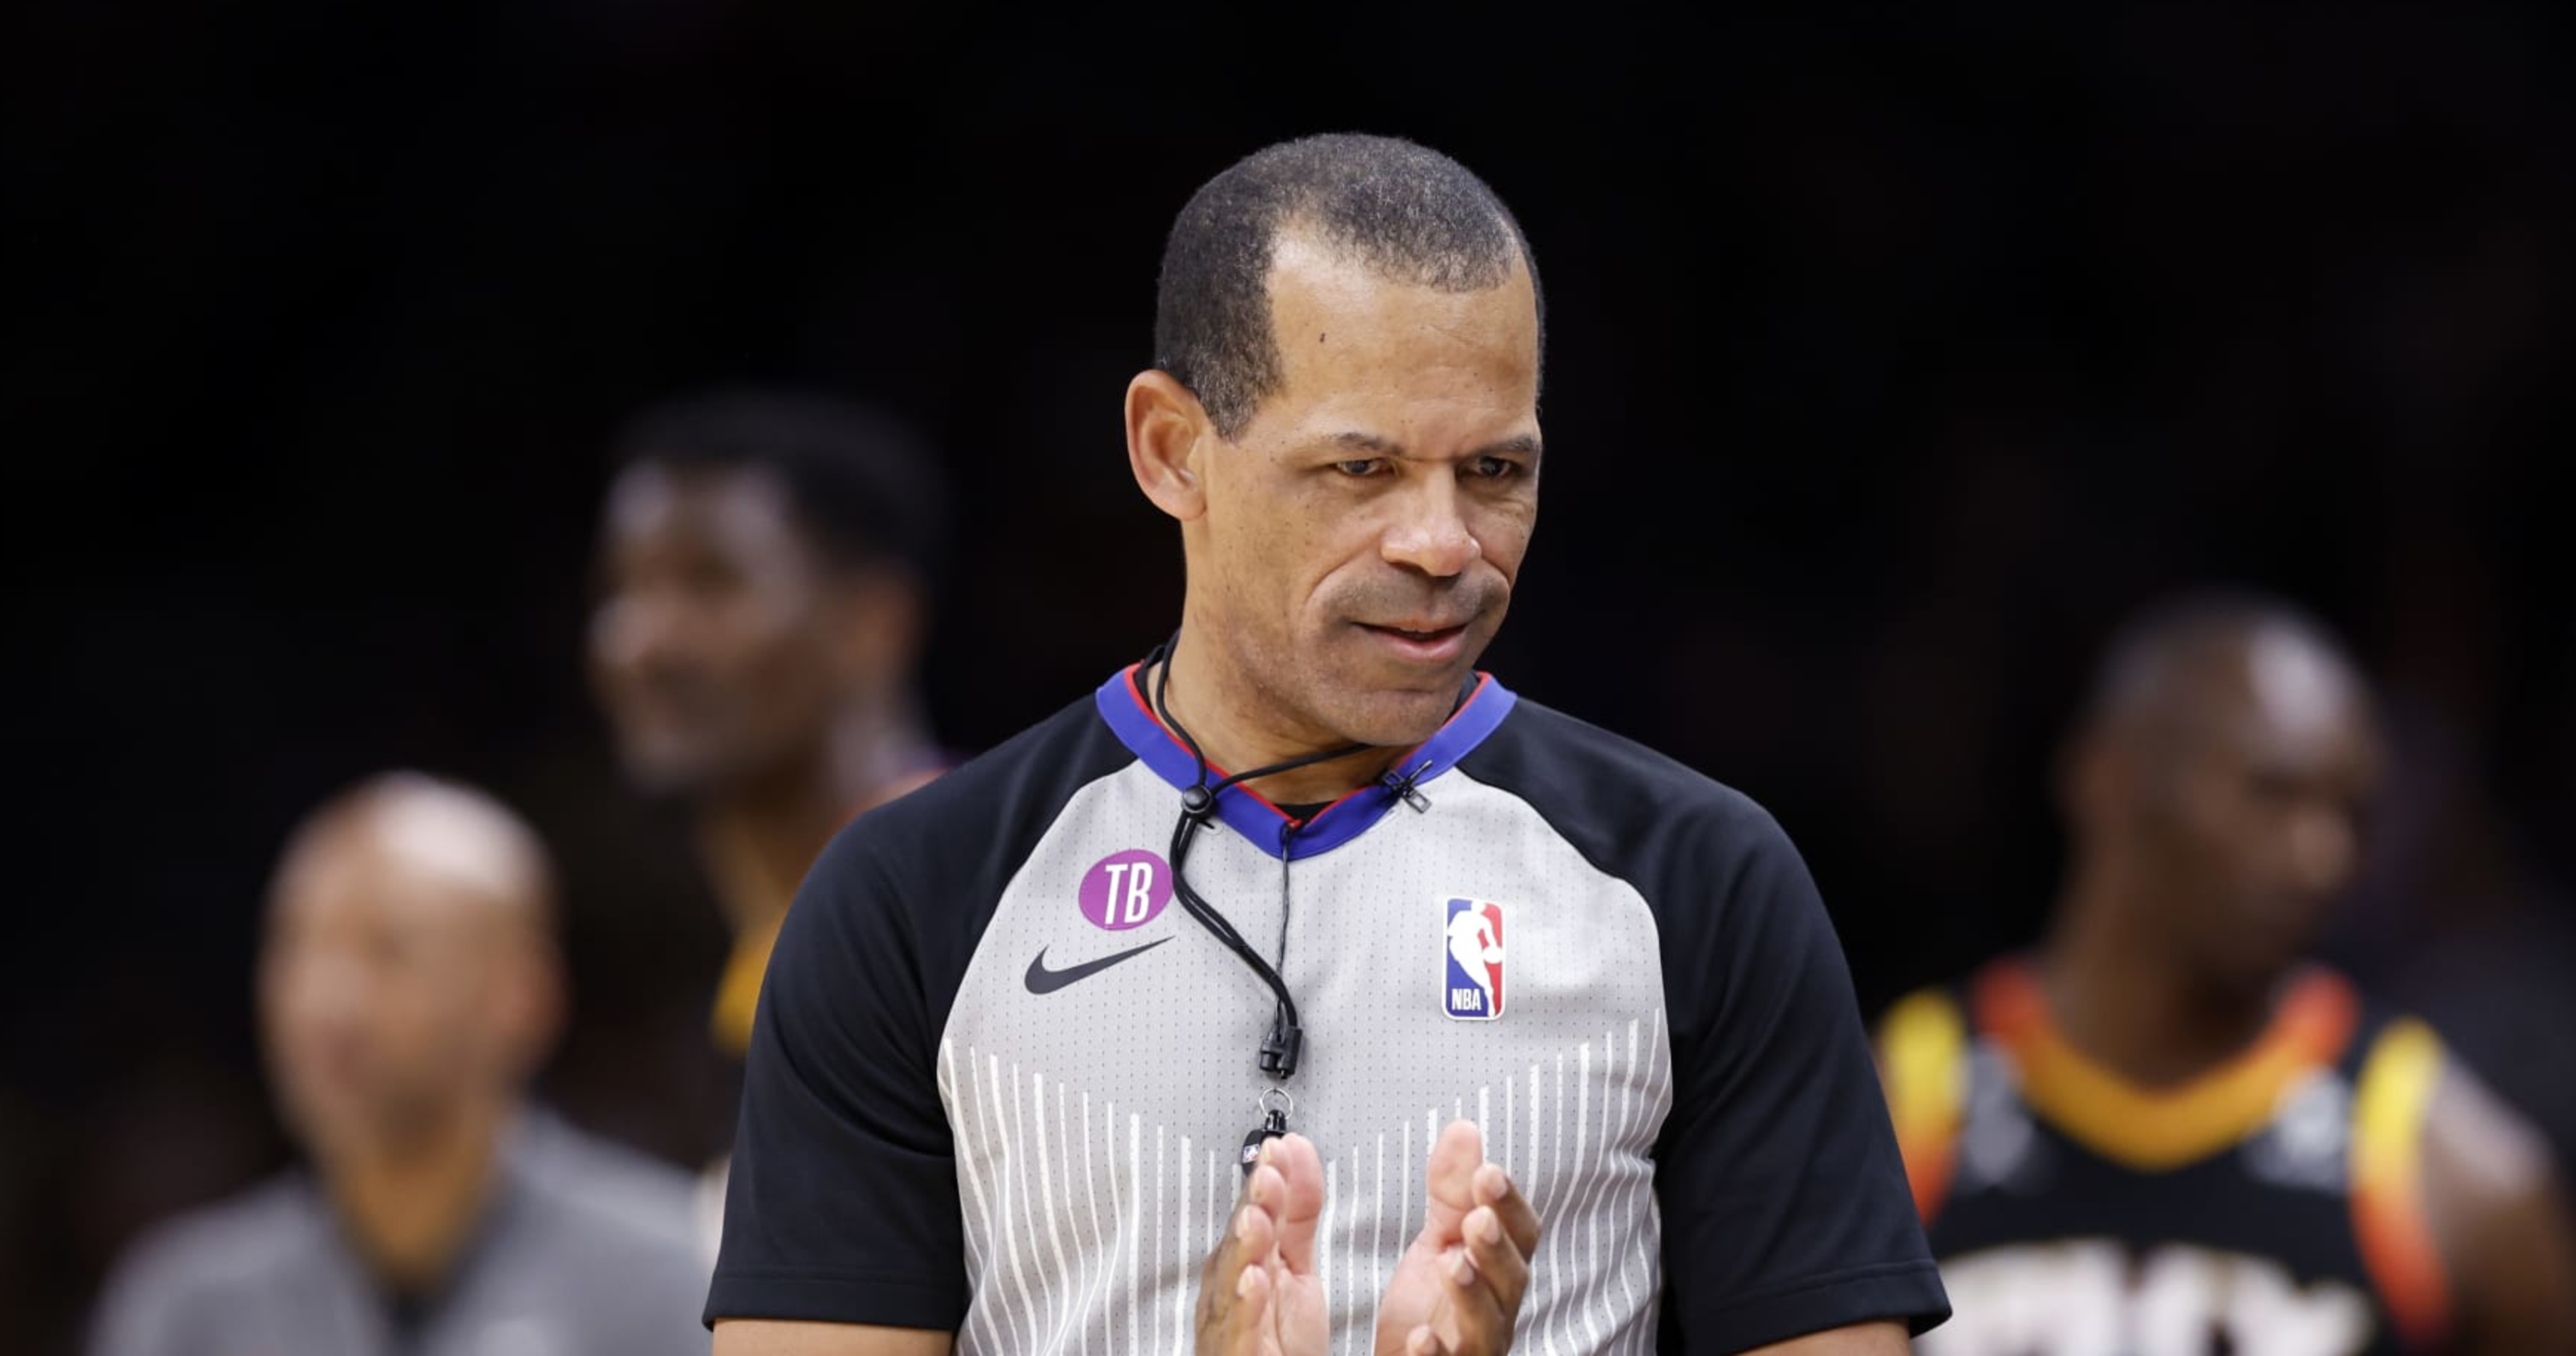 Busting 4 Major Myths About Referees In The NBA Playoffs